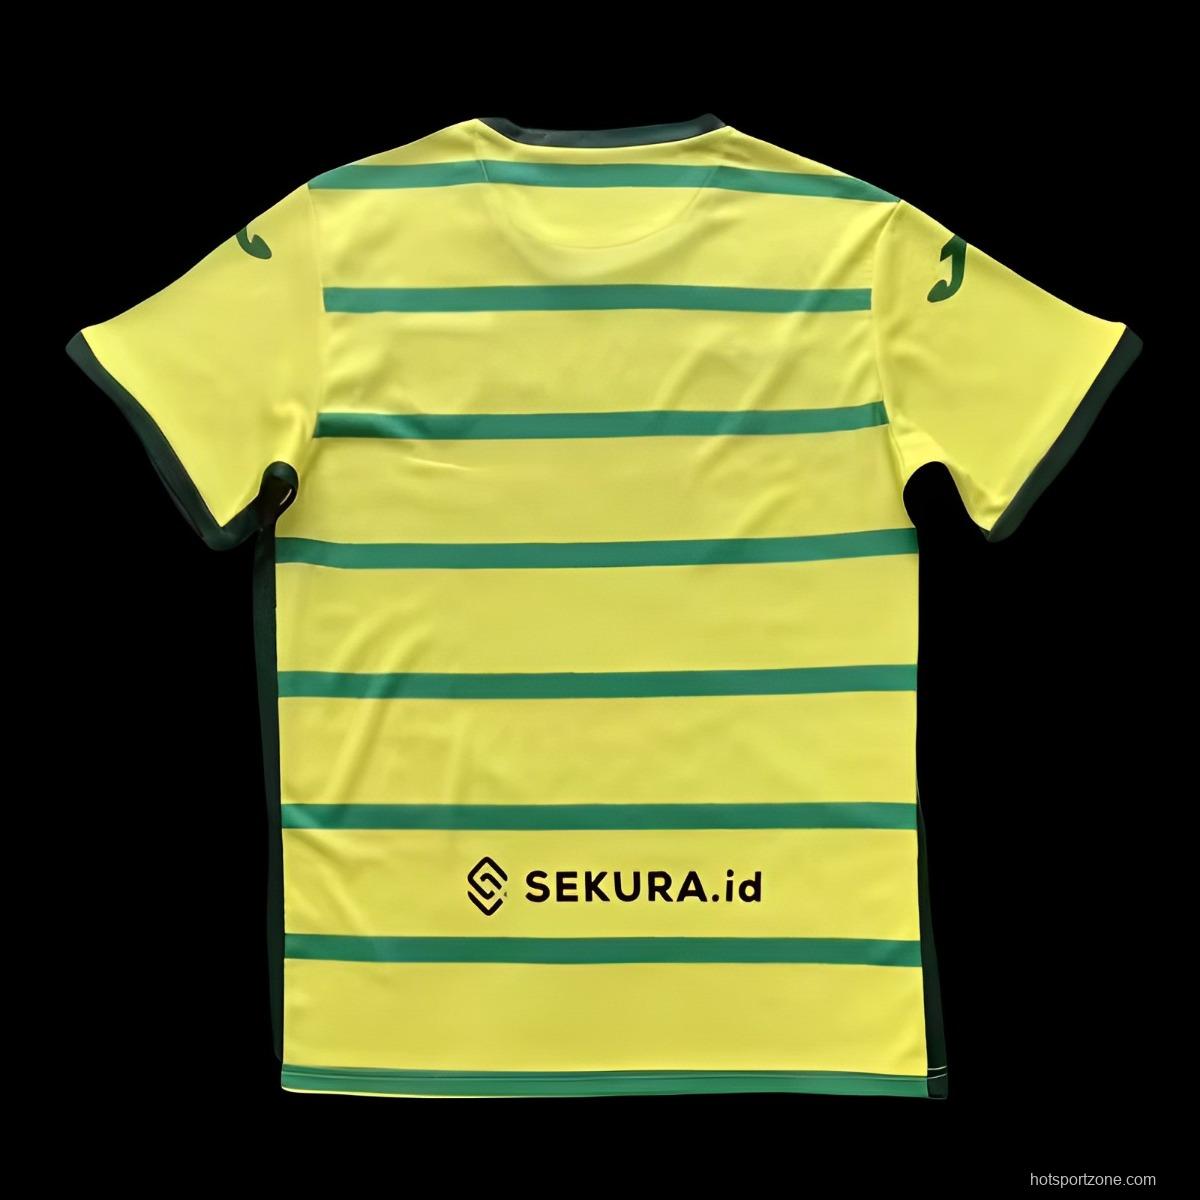 23/24 Norwich City Home Jersey